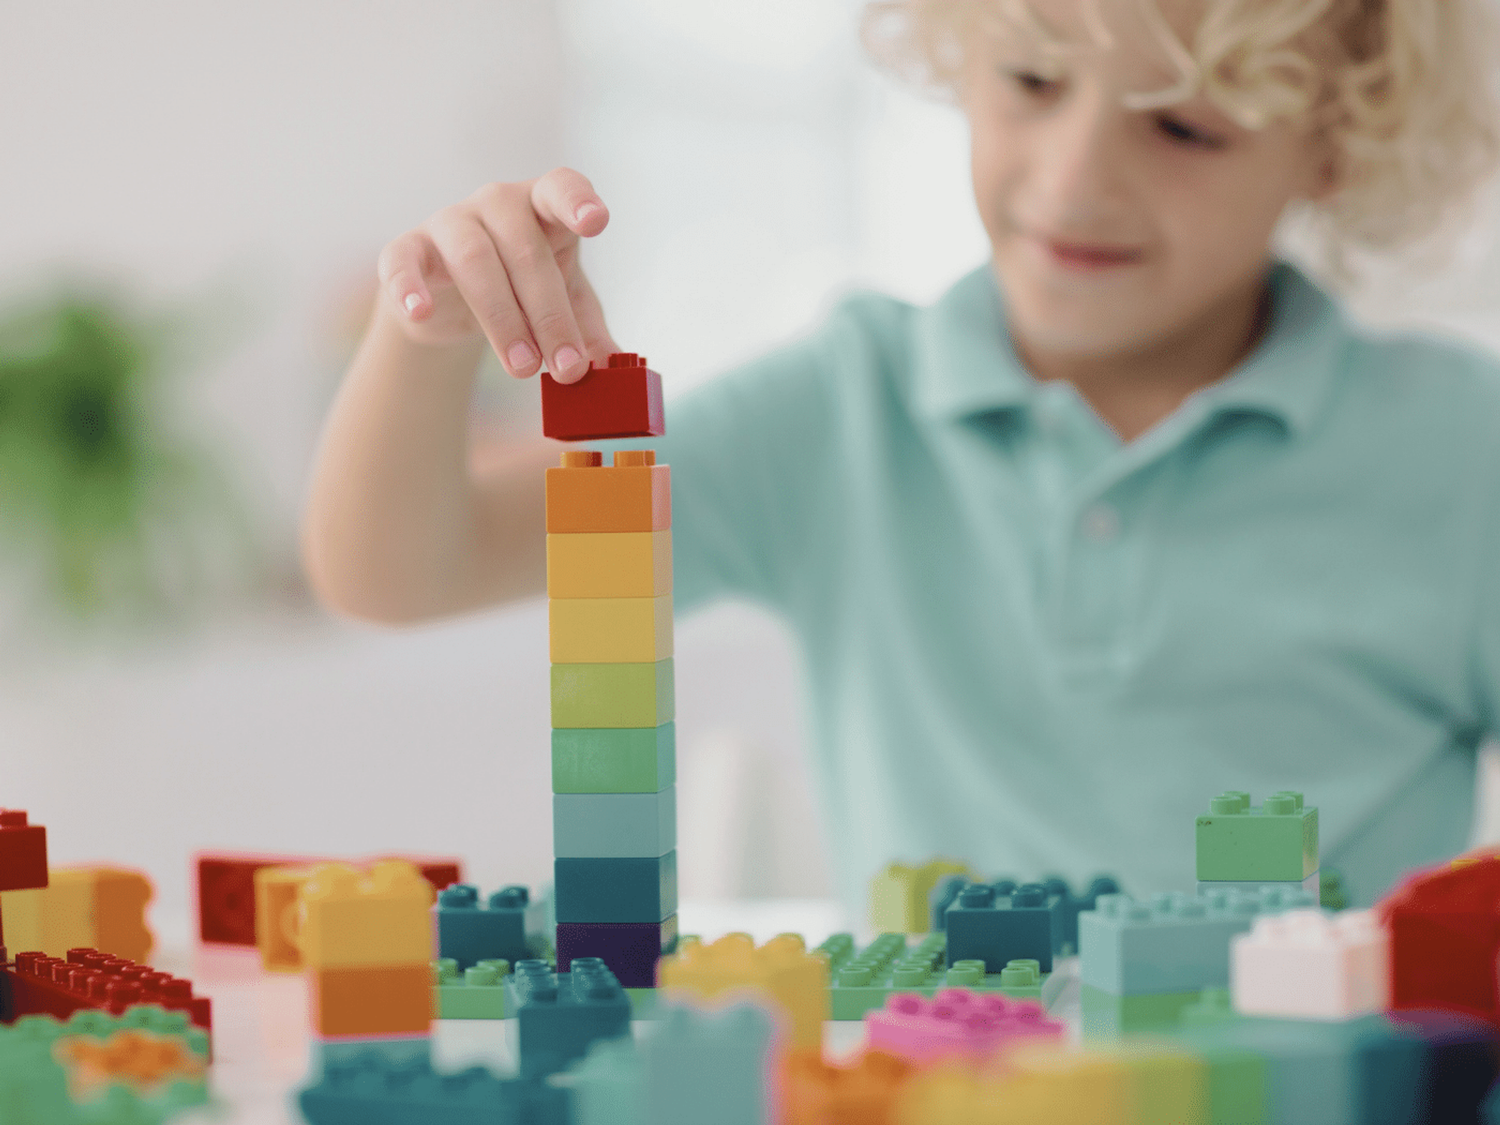 Child playing with building blocks.